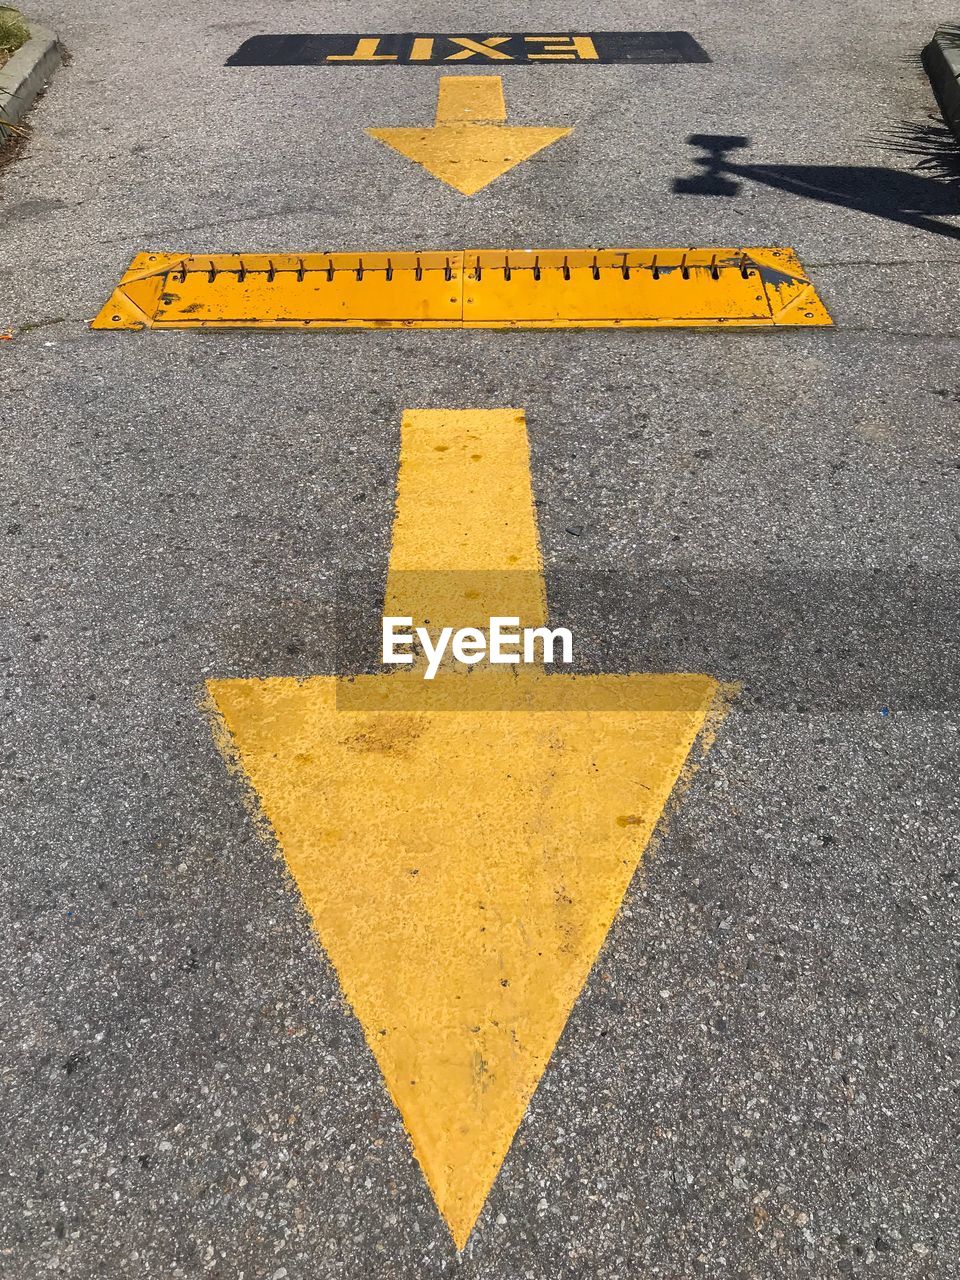 HIGH ANGLE VIEW OF ARROW SYMBOL ON ROAD